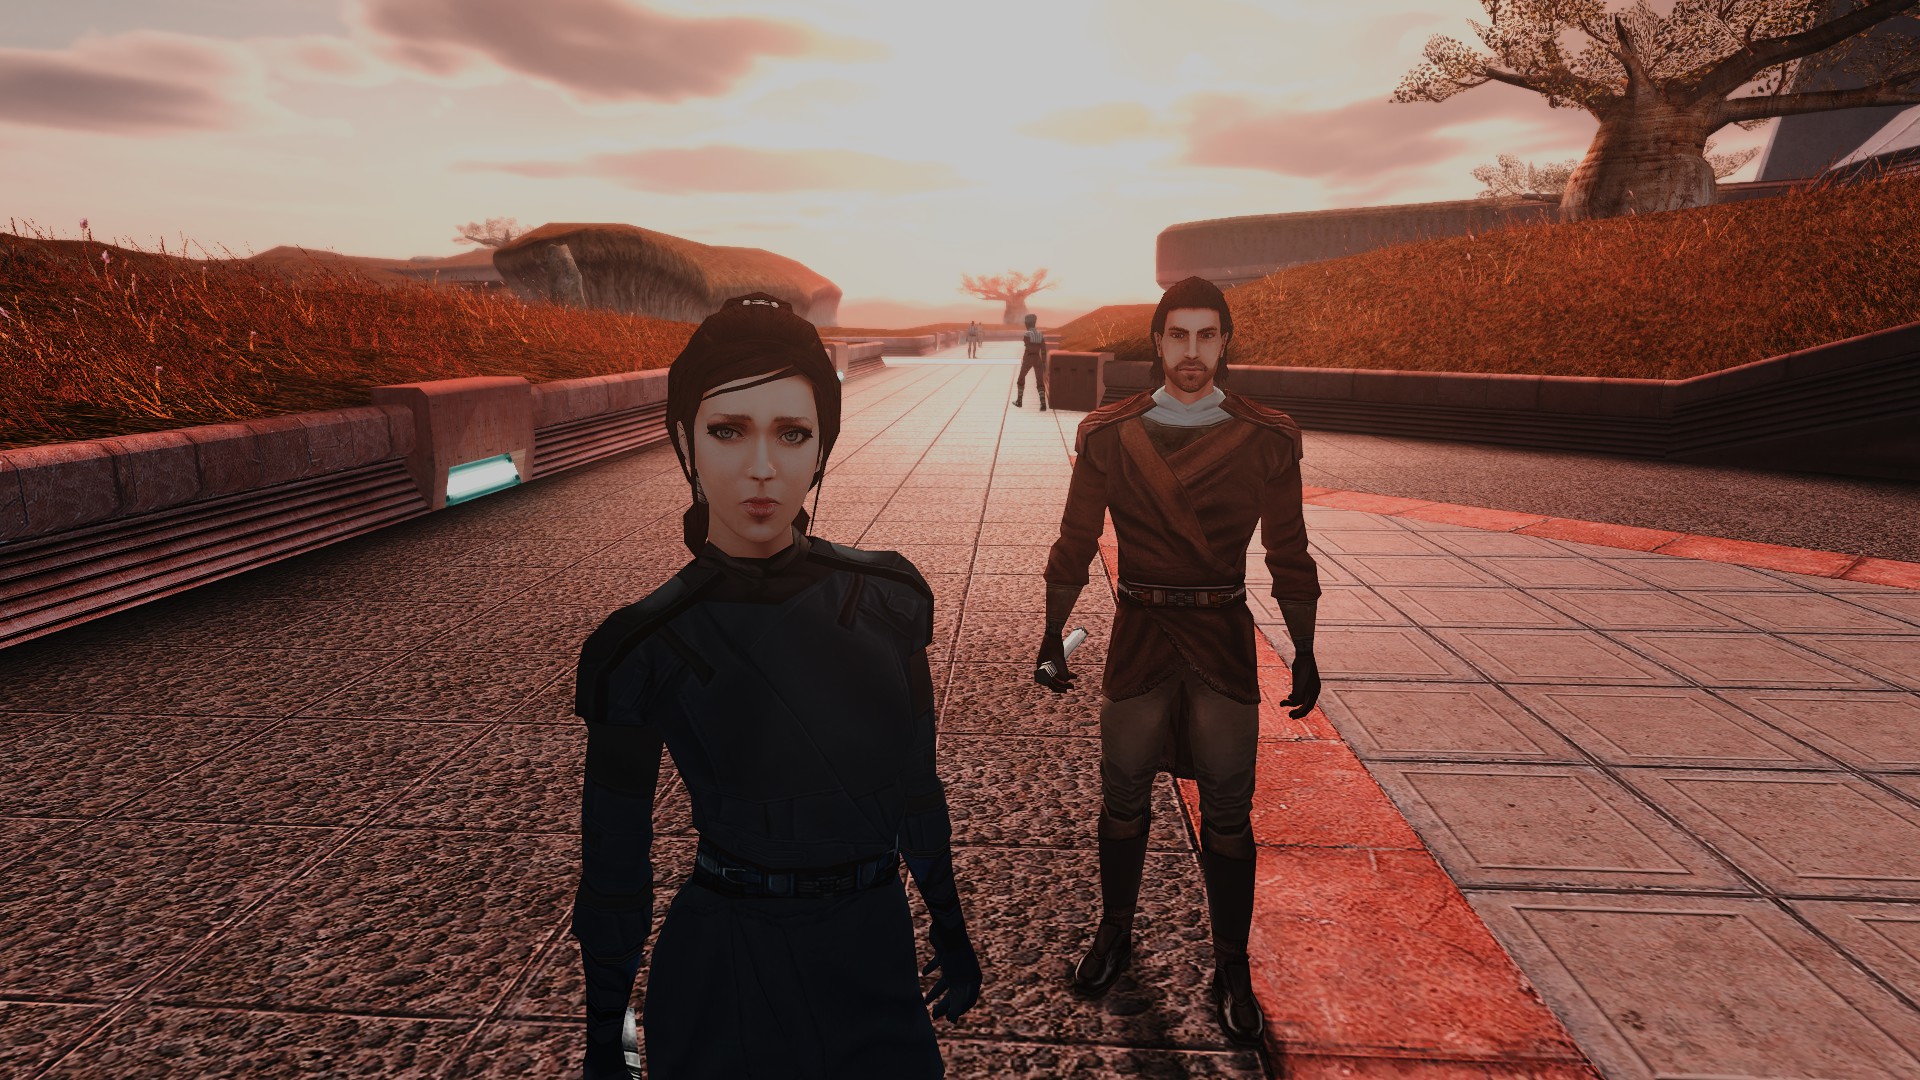 Dec 11, 2017. ↑. With some mods, KotOR can look pretty great. 